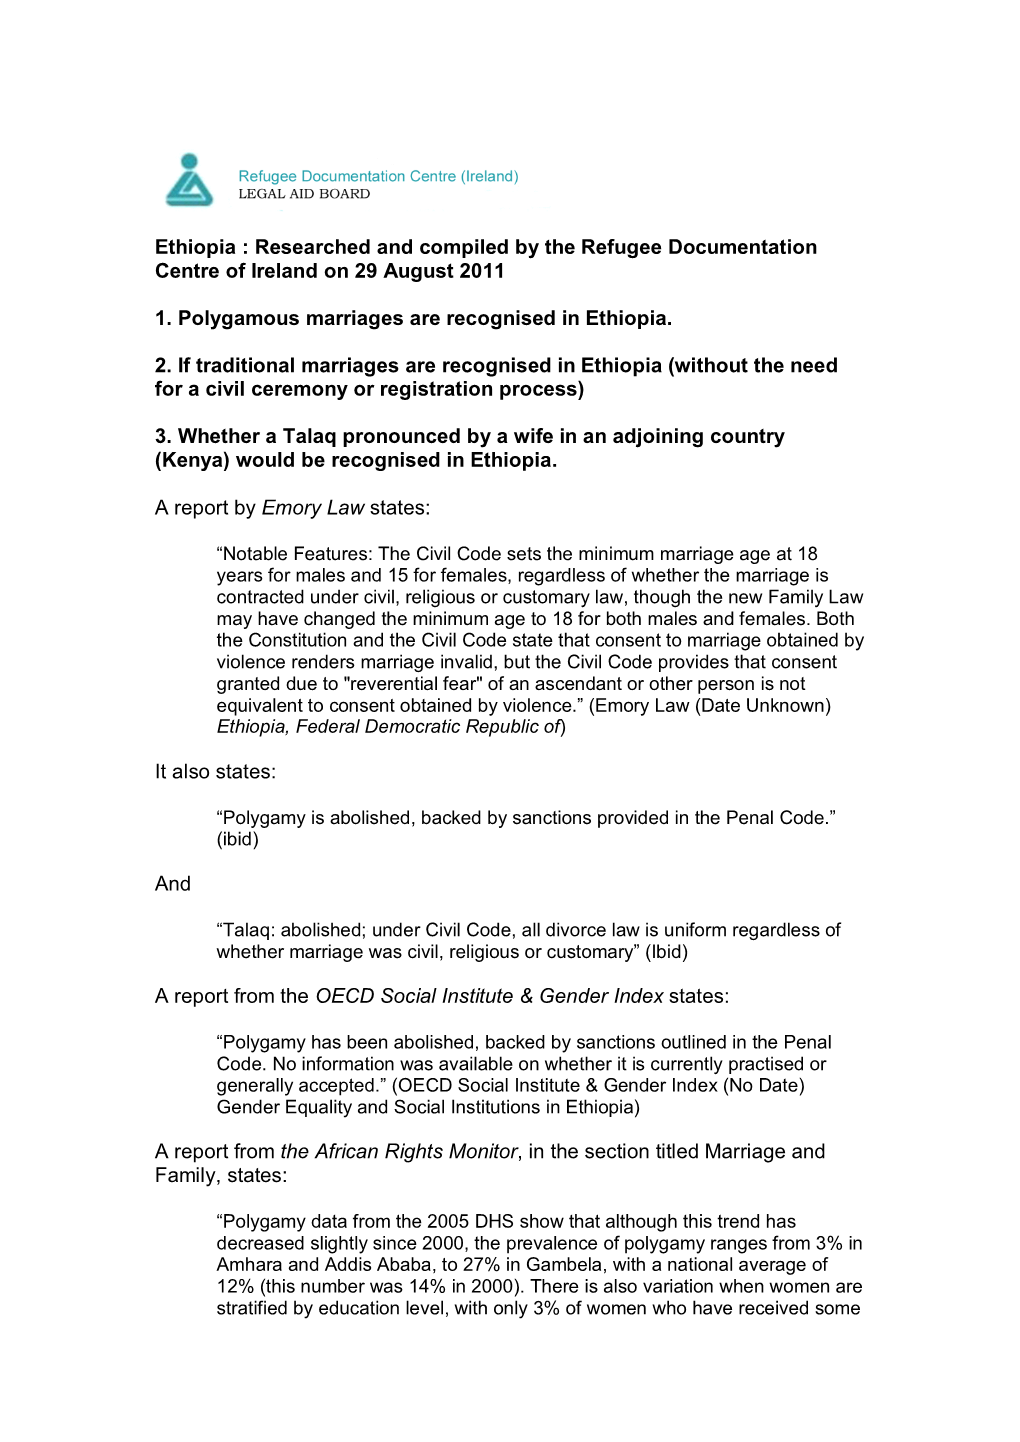 Ethiopia : Researched and Compiled by the Refugee Documentation Centre of Ireland on 29 August 2011